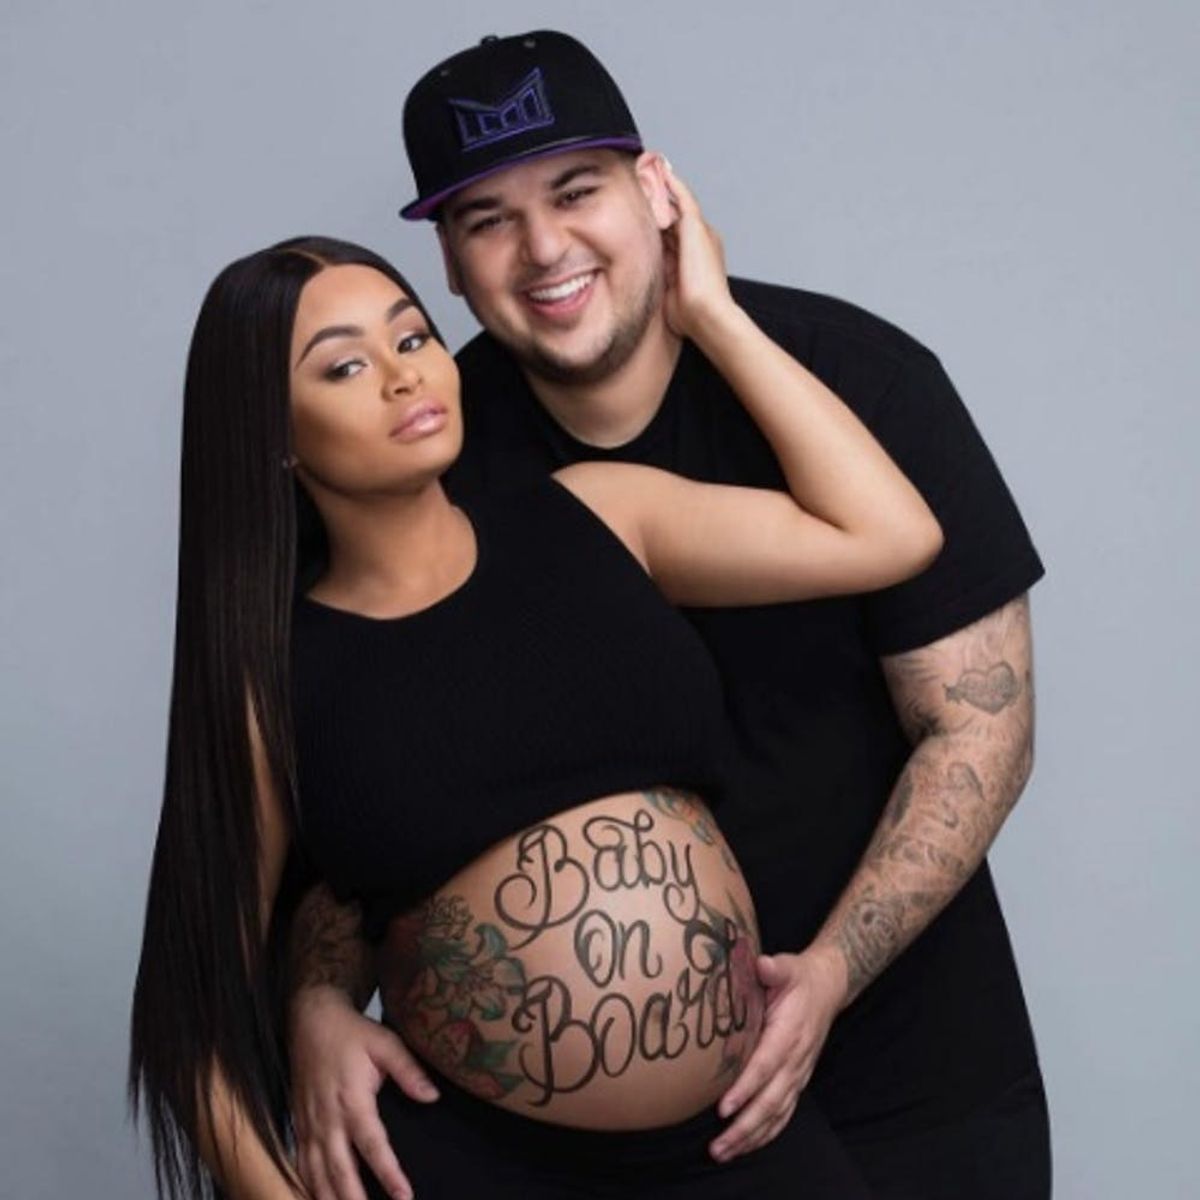 Blac Chyna and Rob K Just Had Their Baby Girl and Gave Her a Totally Unusual Name